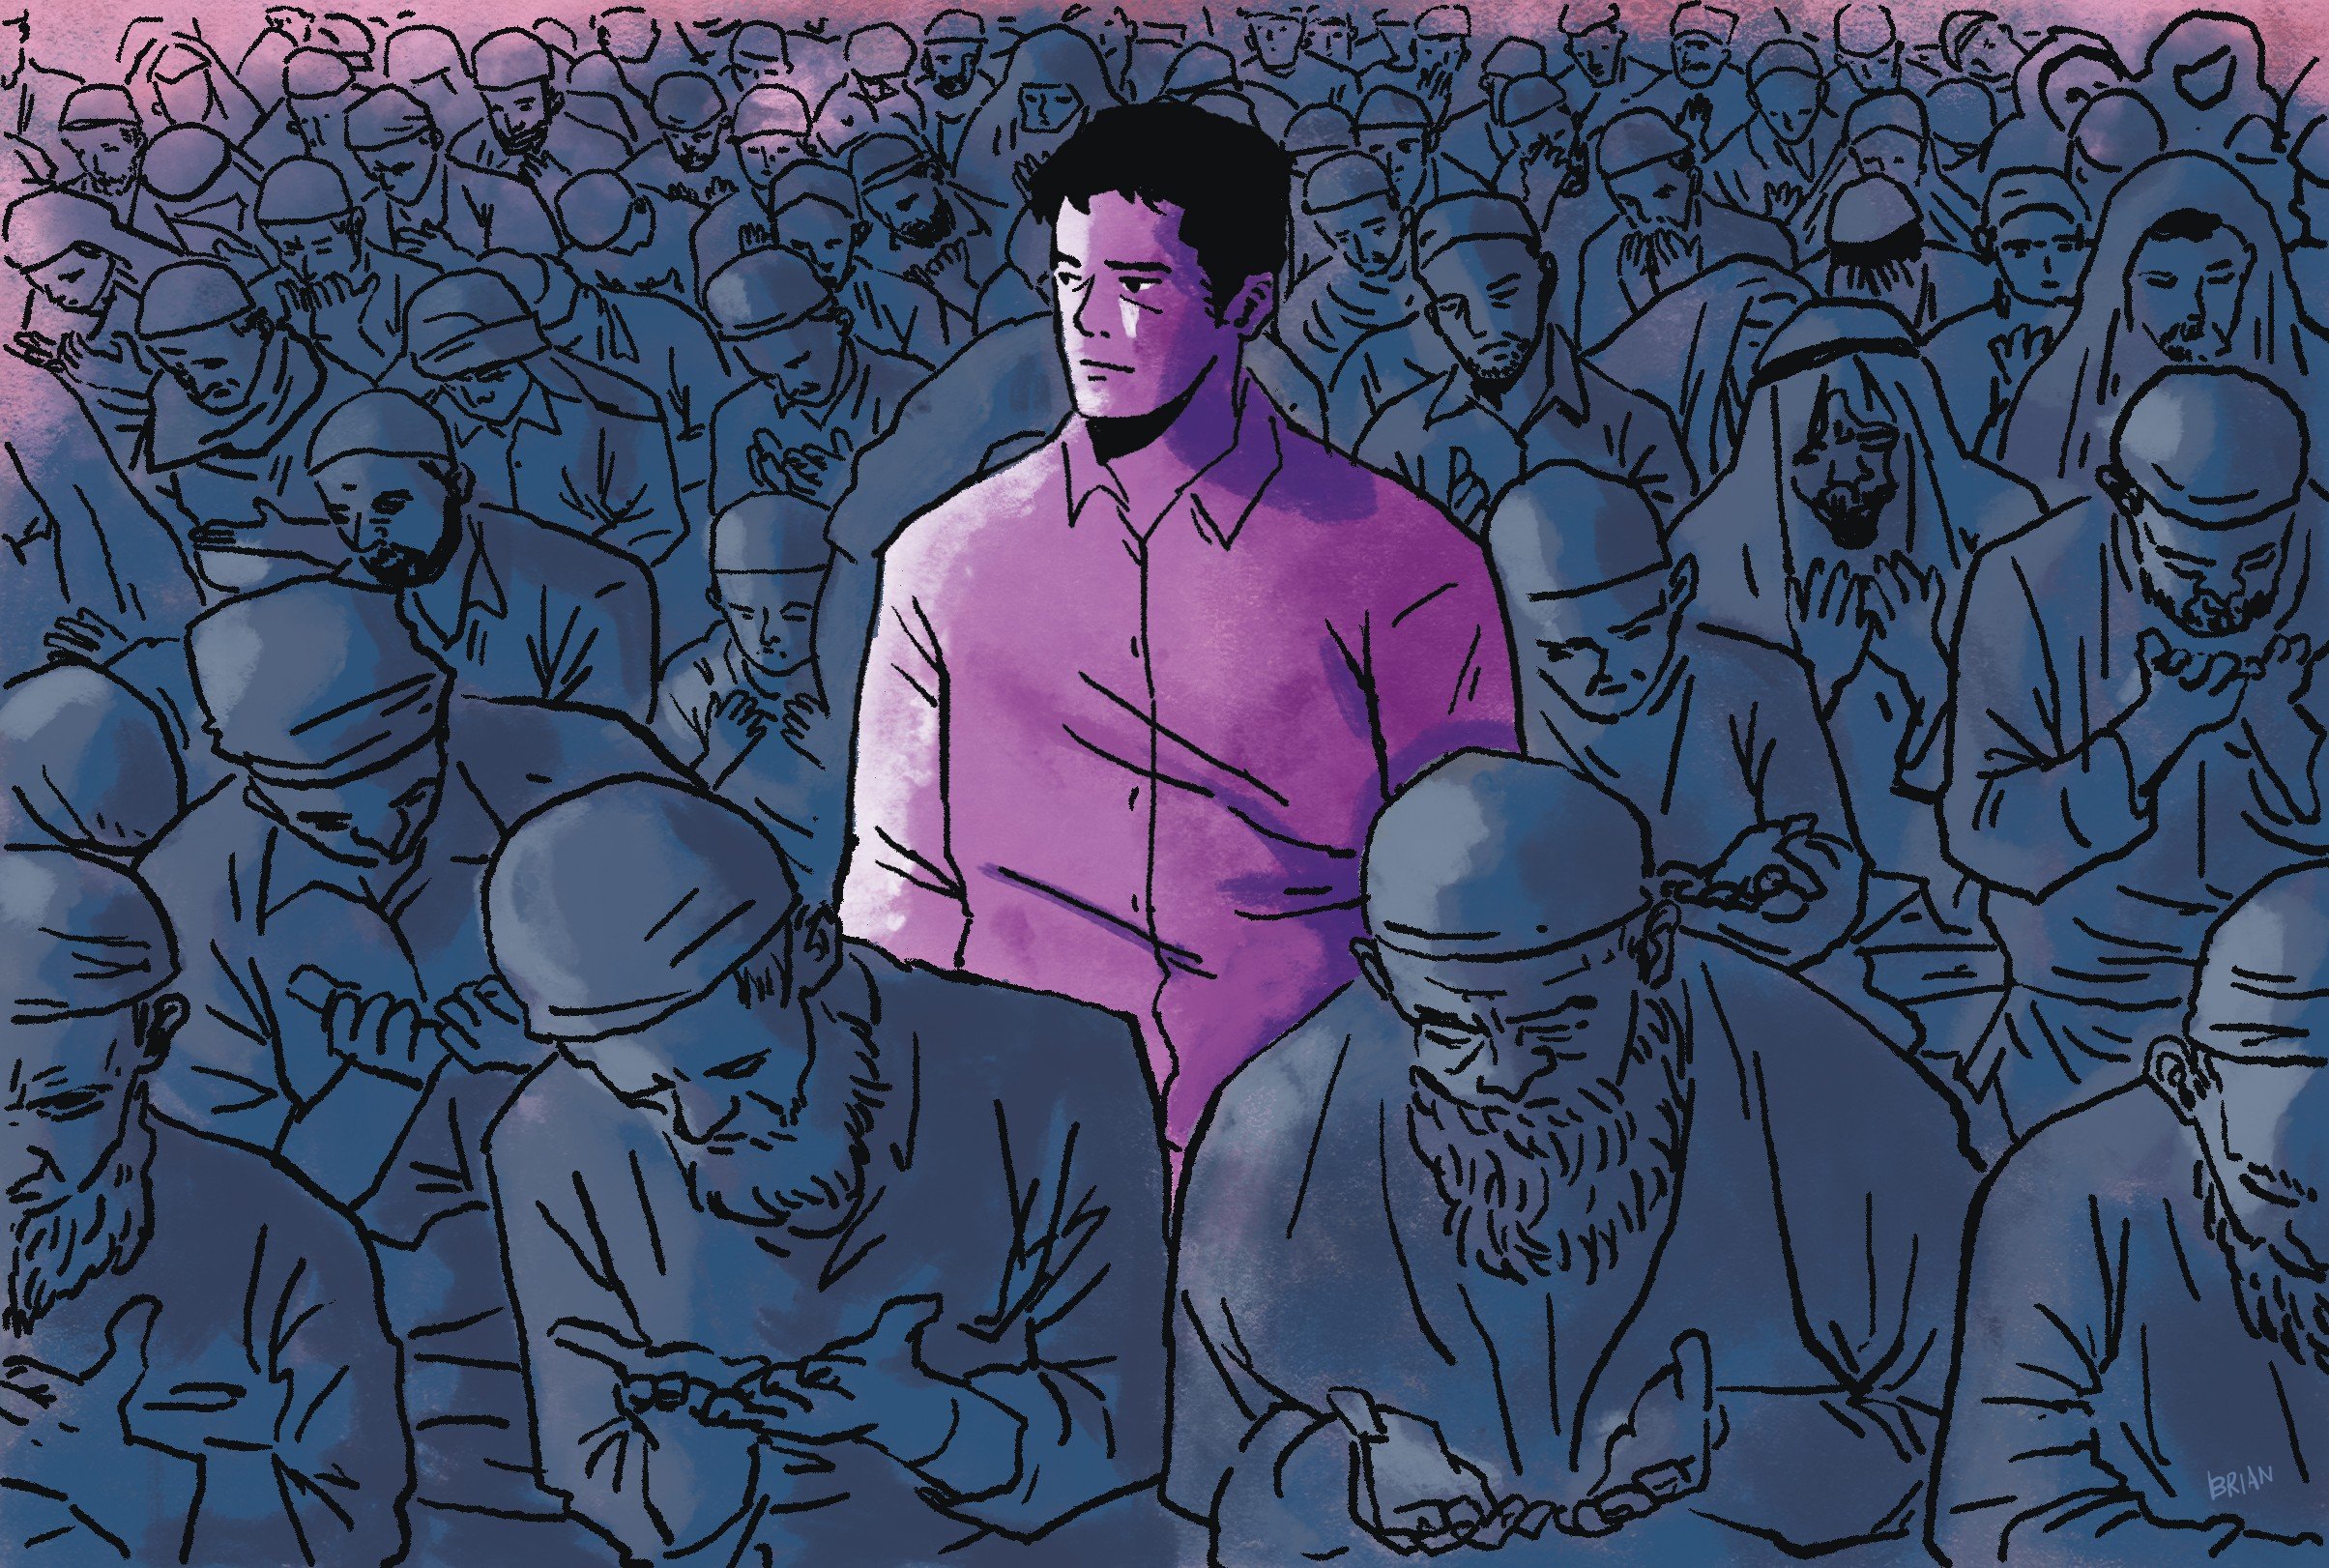 Indonesia is a country built on rigid religious traditions. So what happens to non-believers? Illustration: Brian Wang